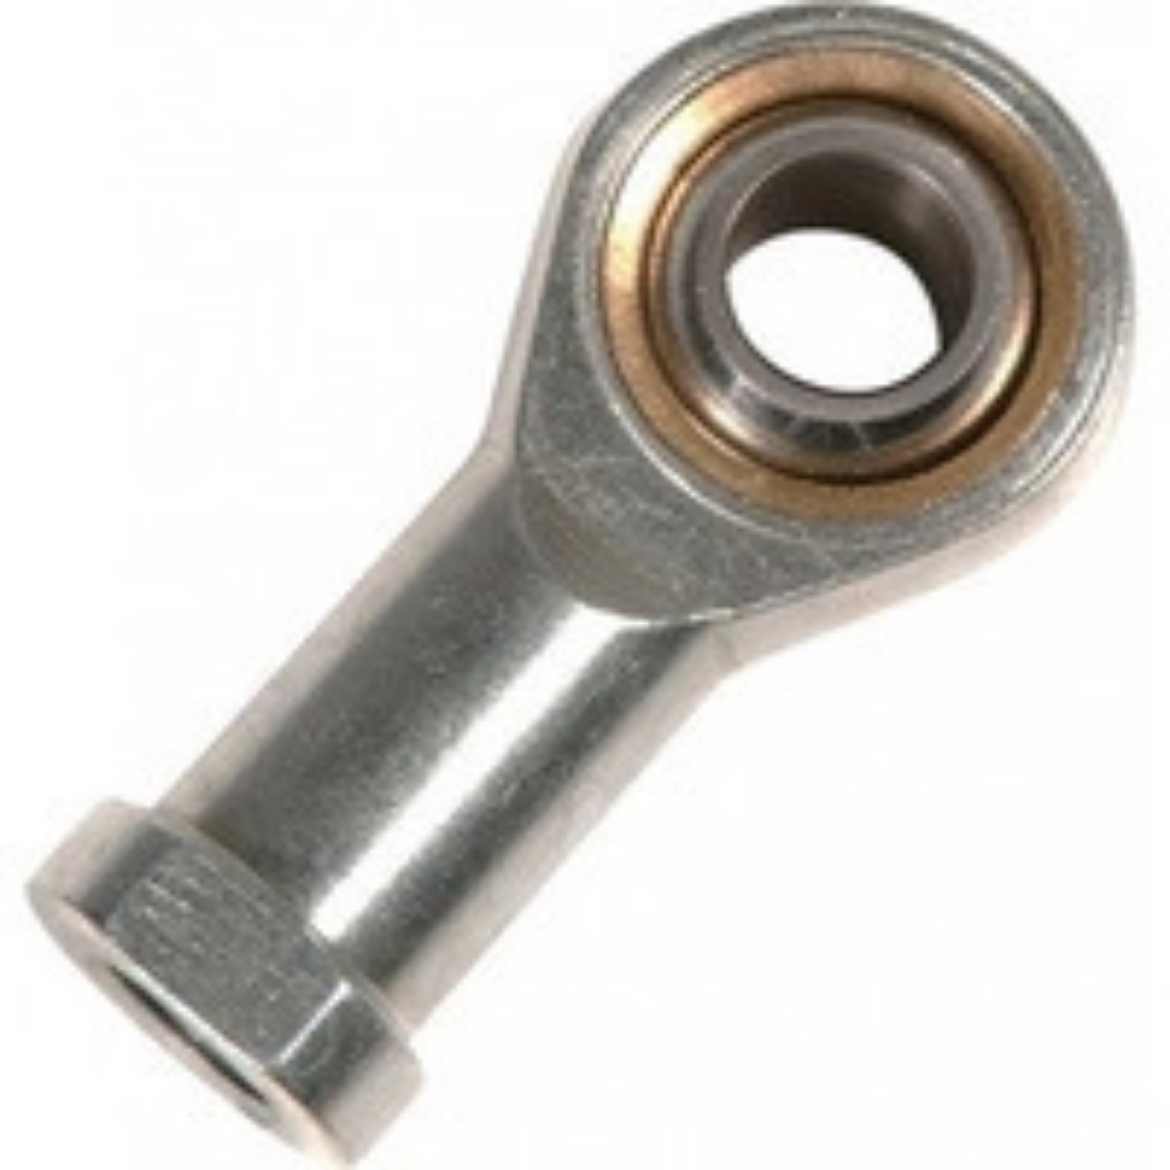 Picture of ROD END RH 3/4 BORE, 3/4-16 FEMALE END